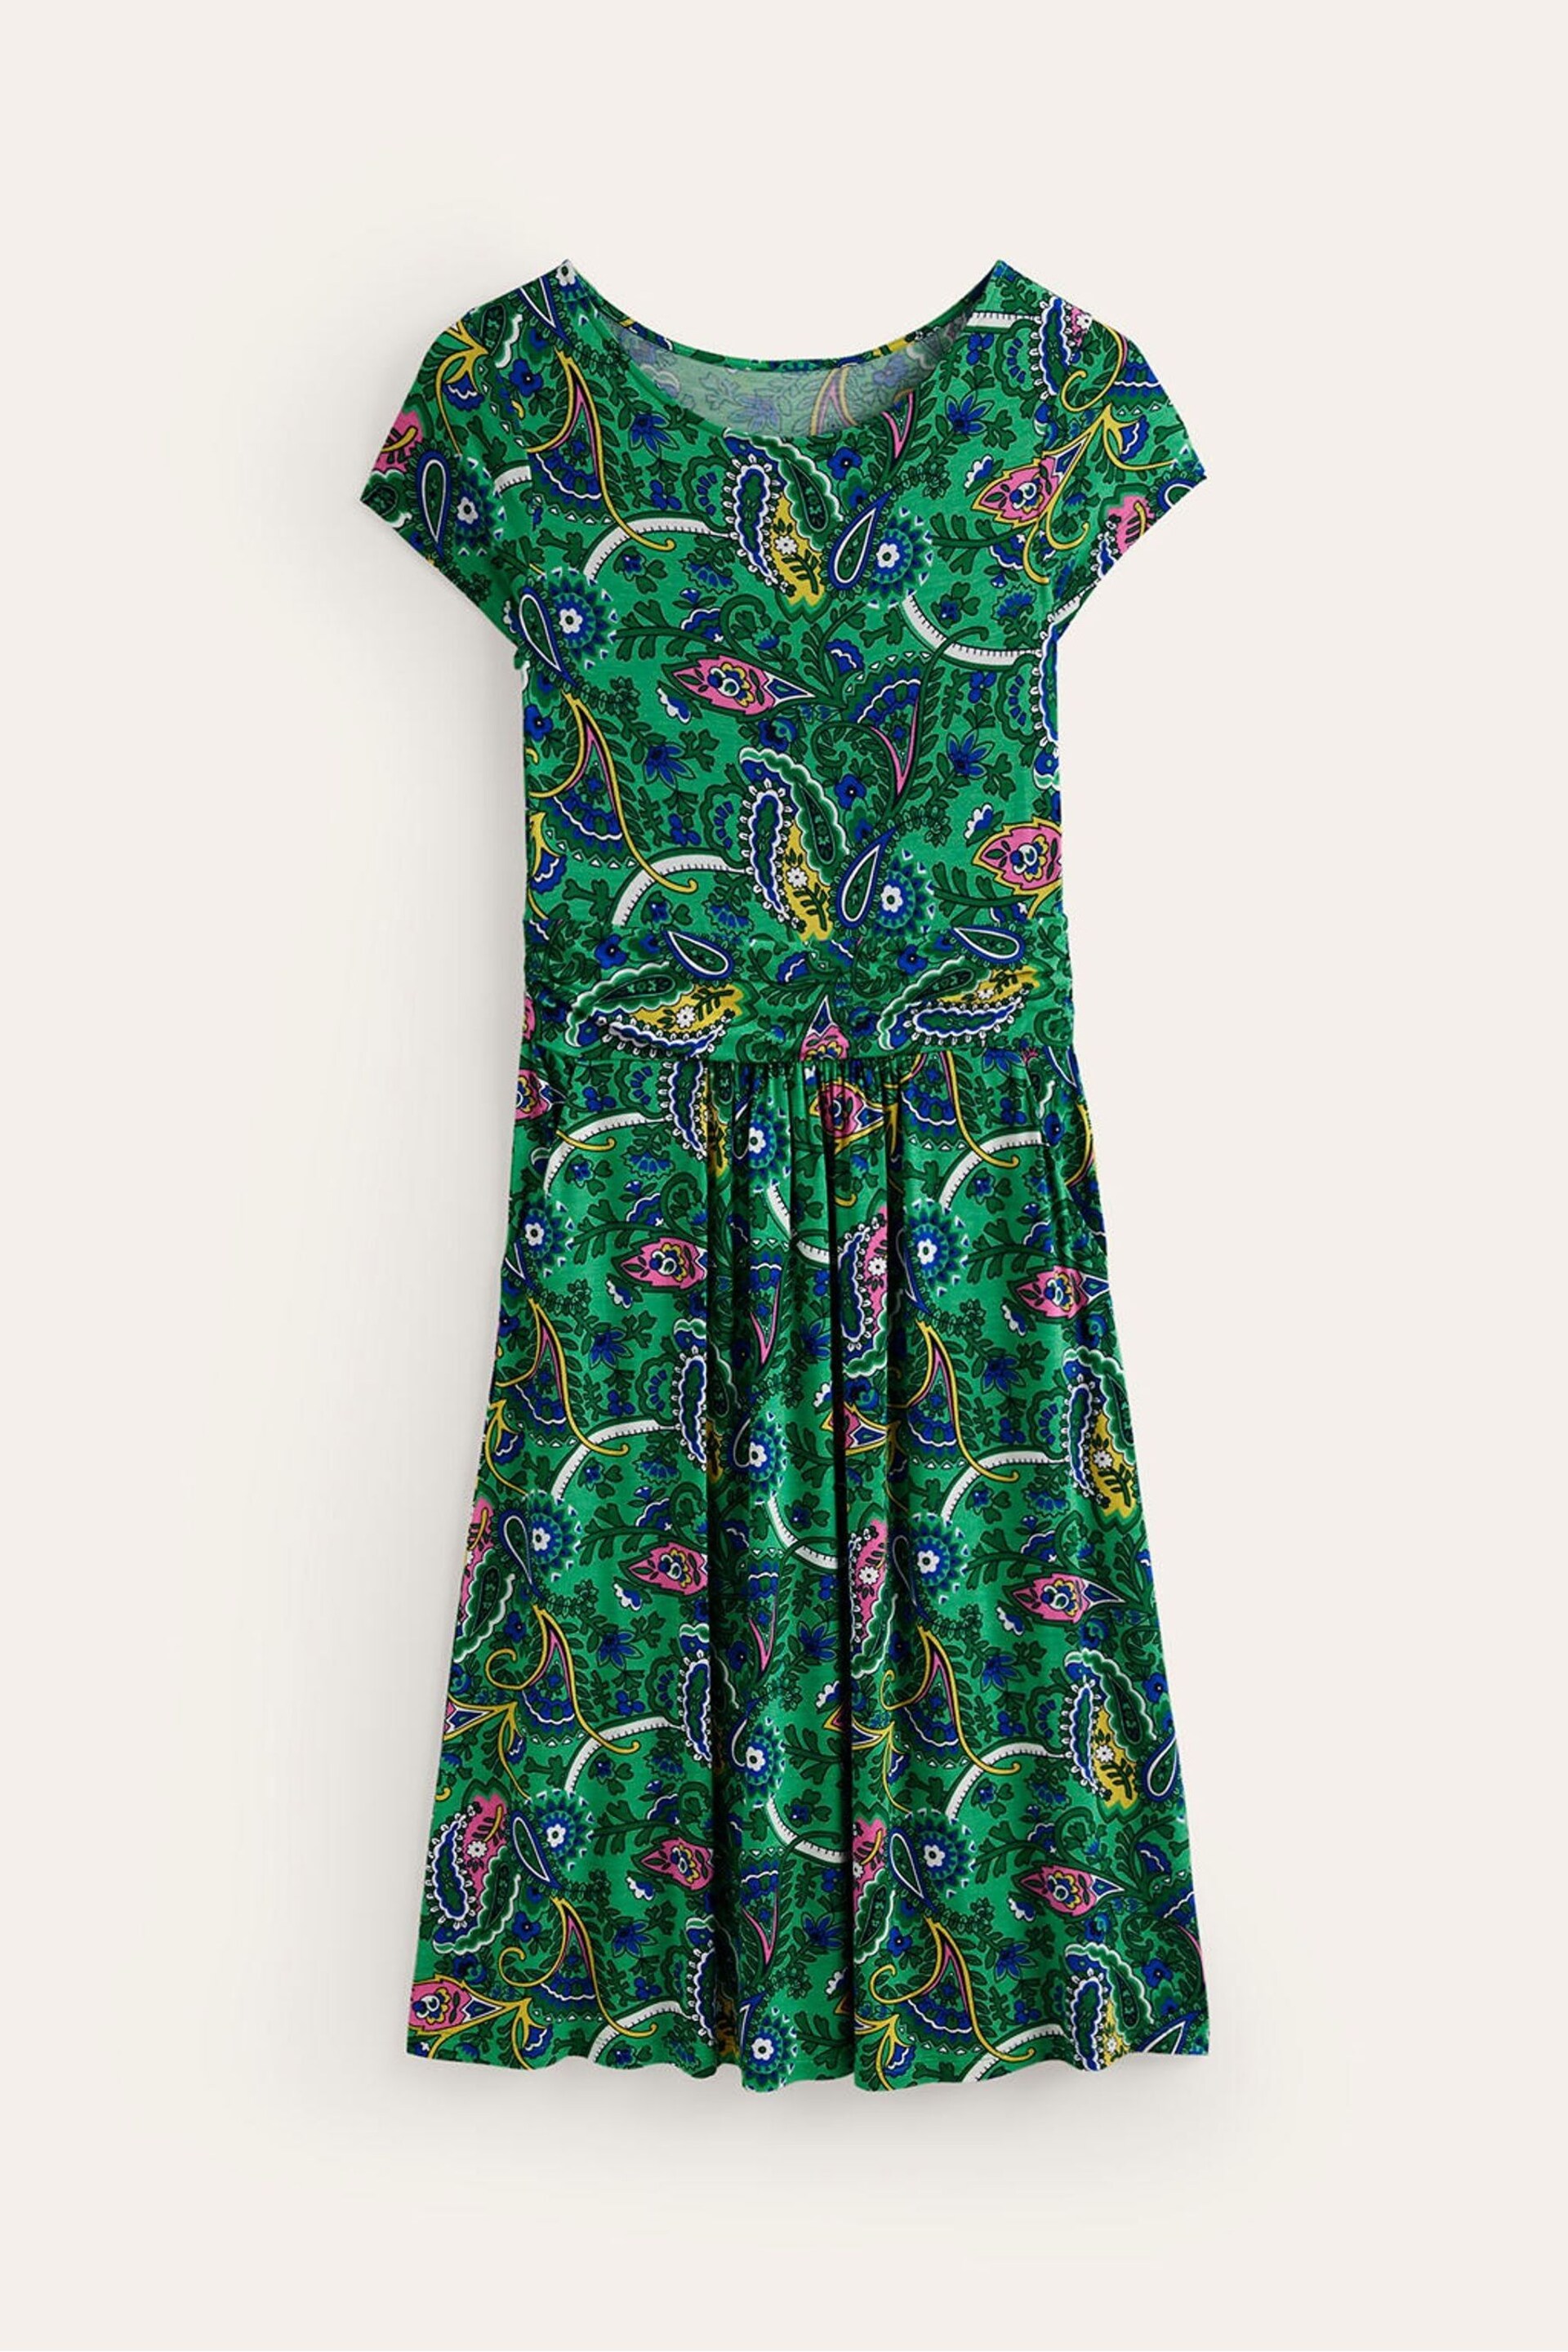 Boden Green Petite Amelie Jersey Dress - Image 5 of 5